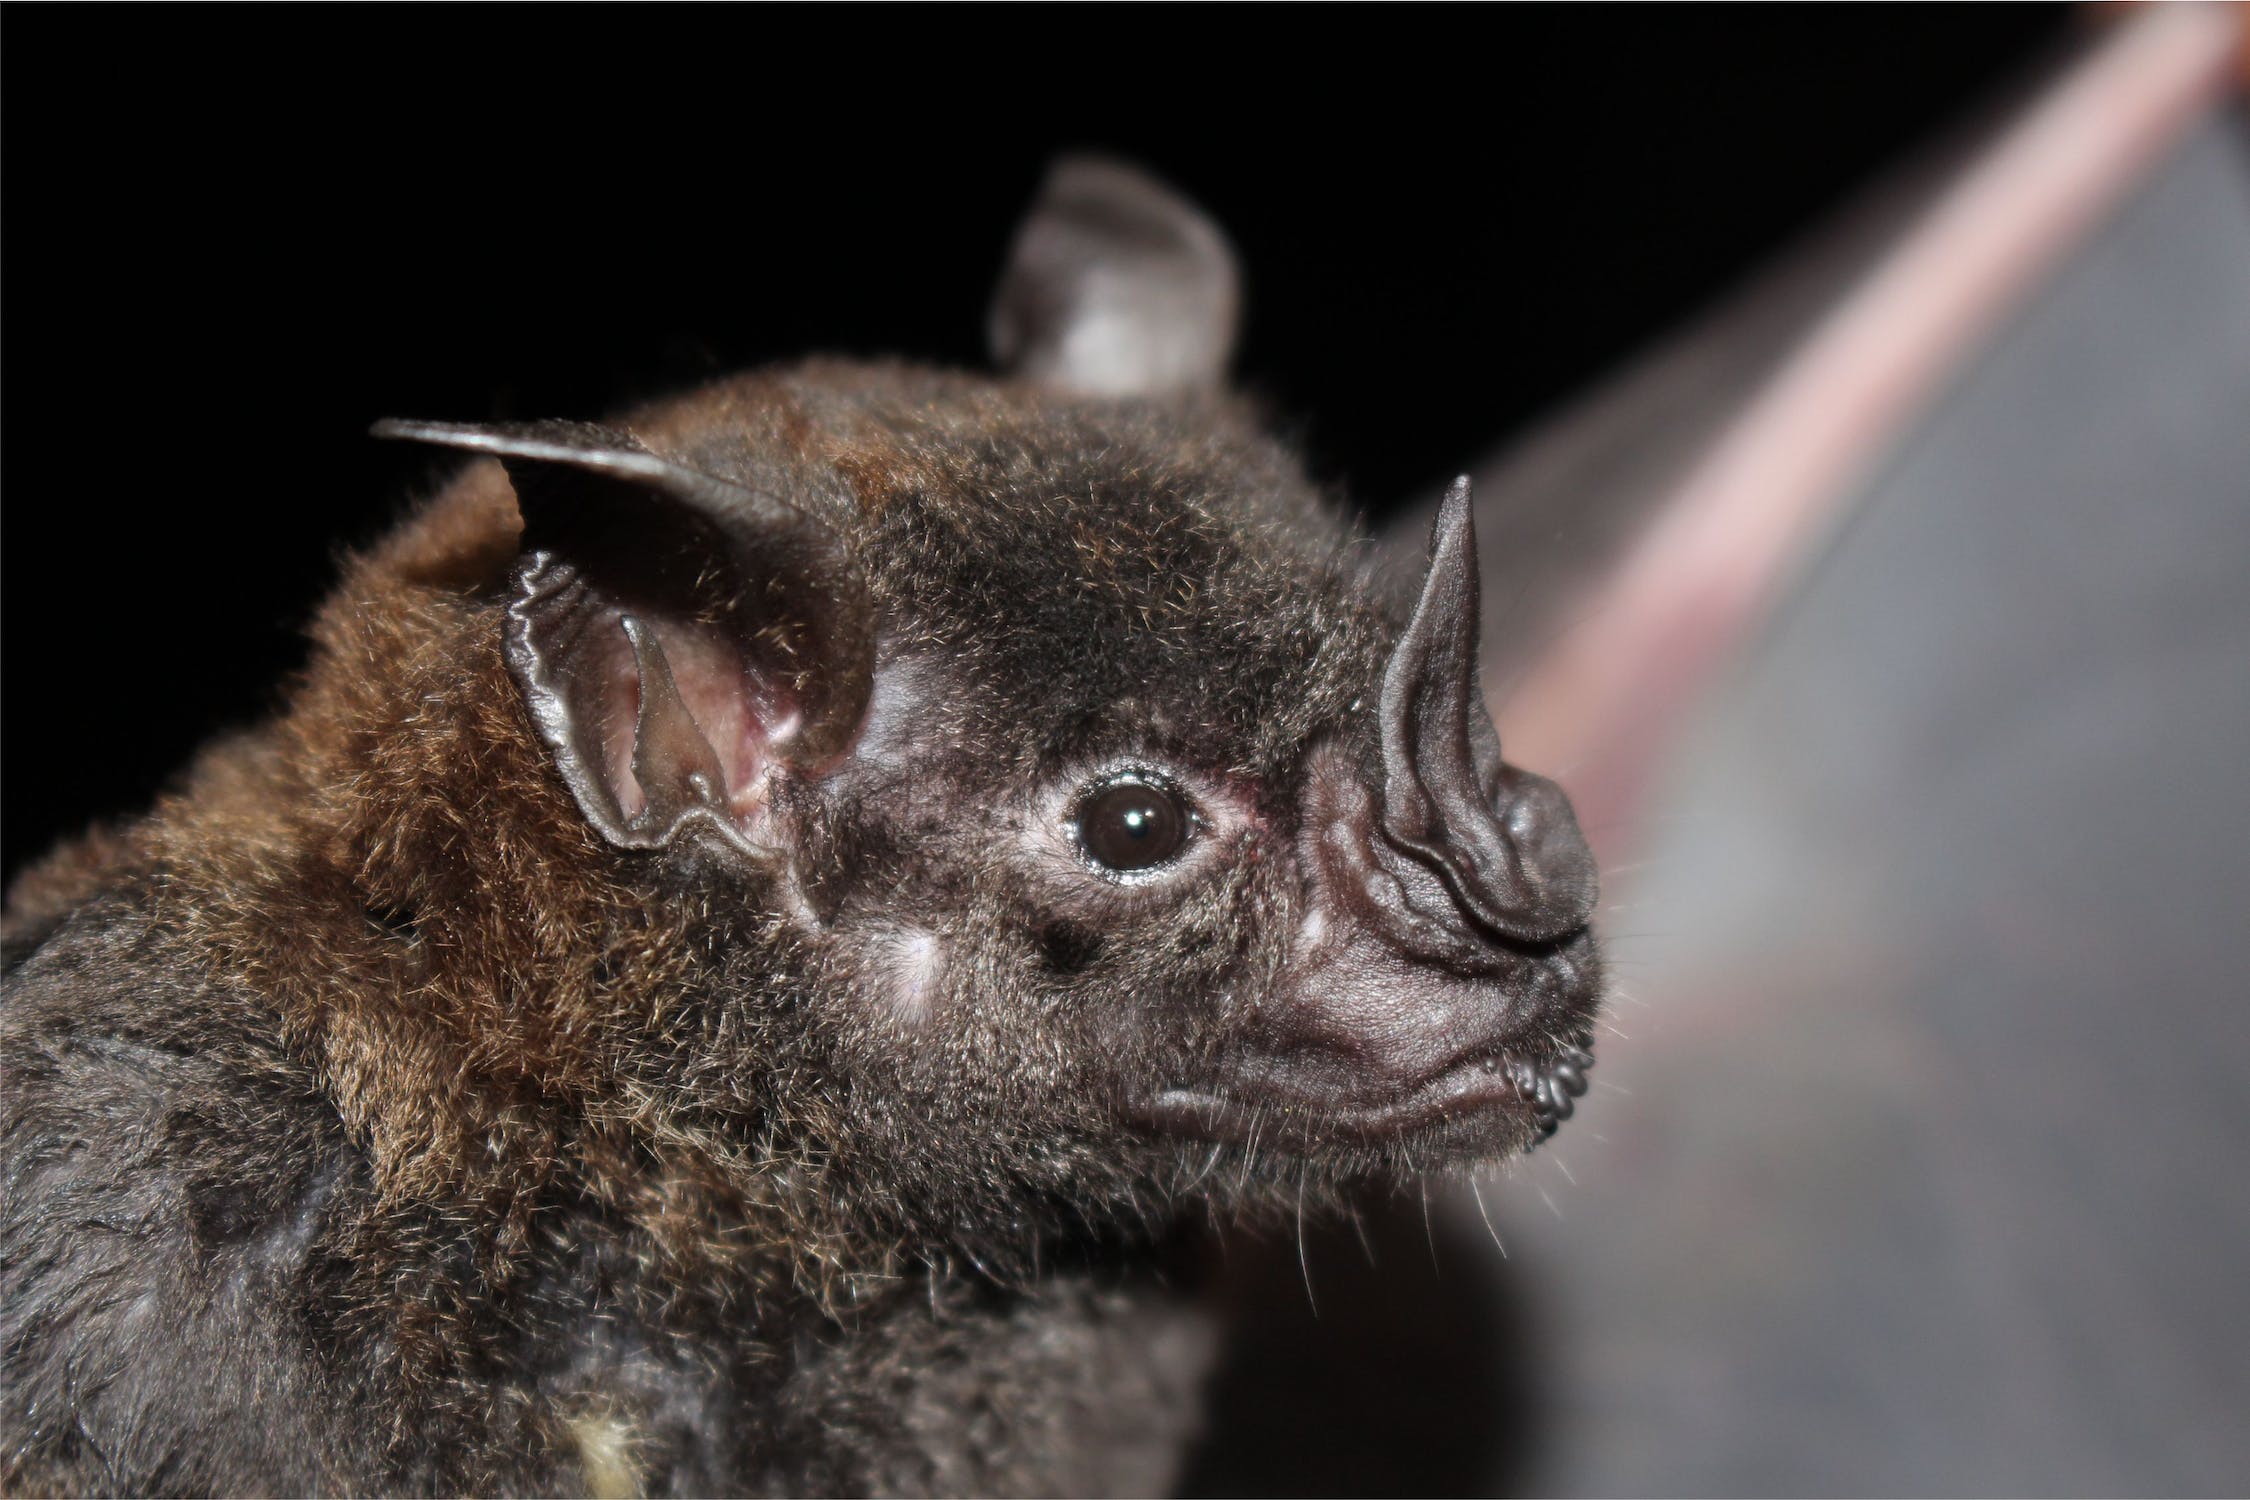 A bat with a pointed nose